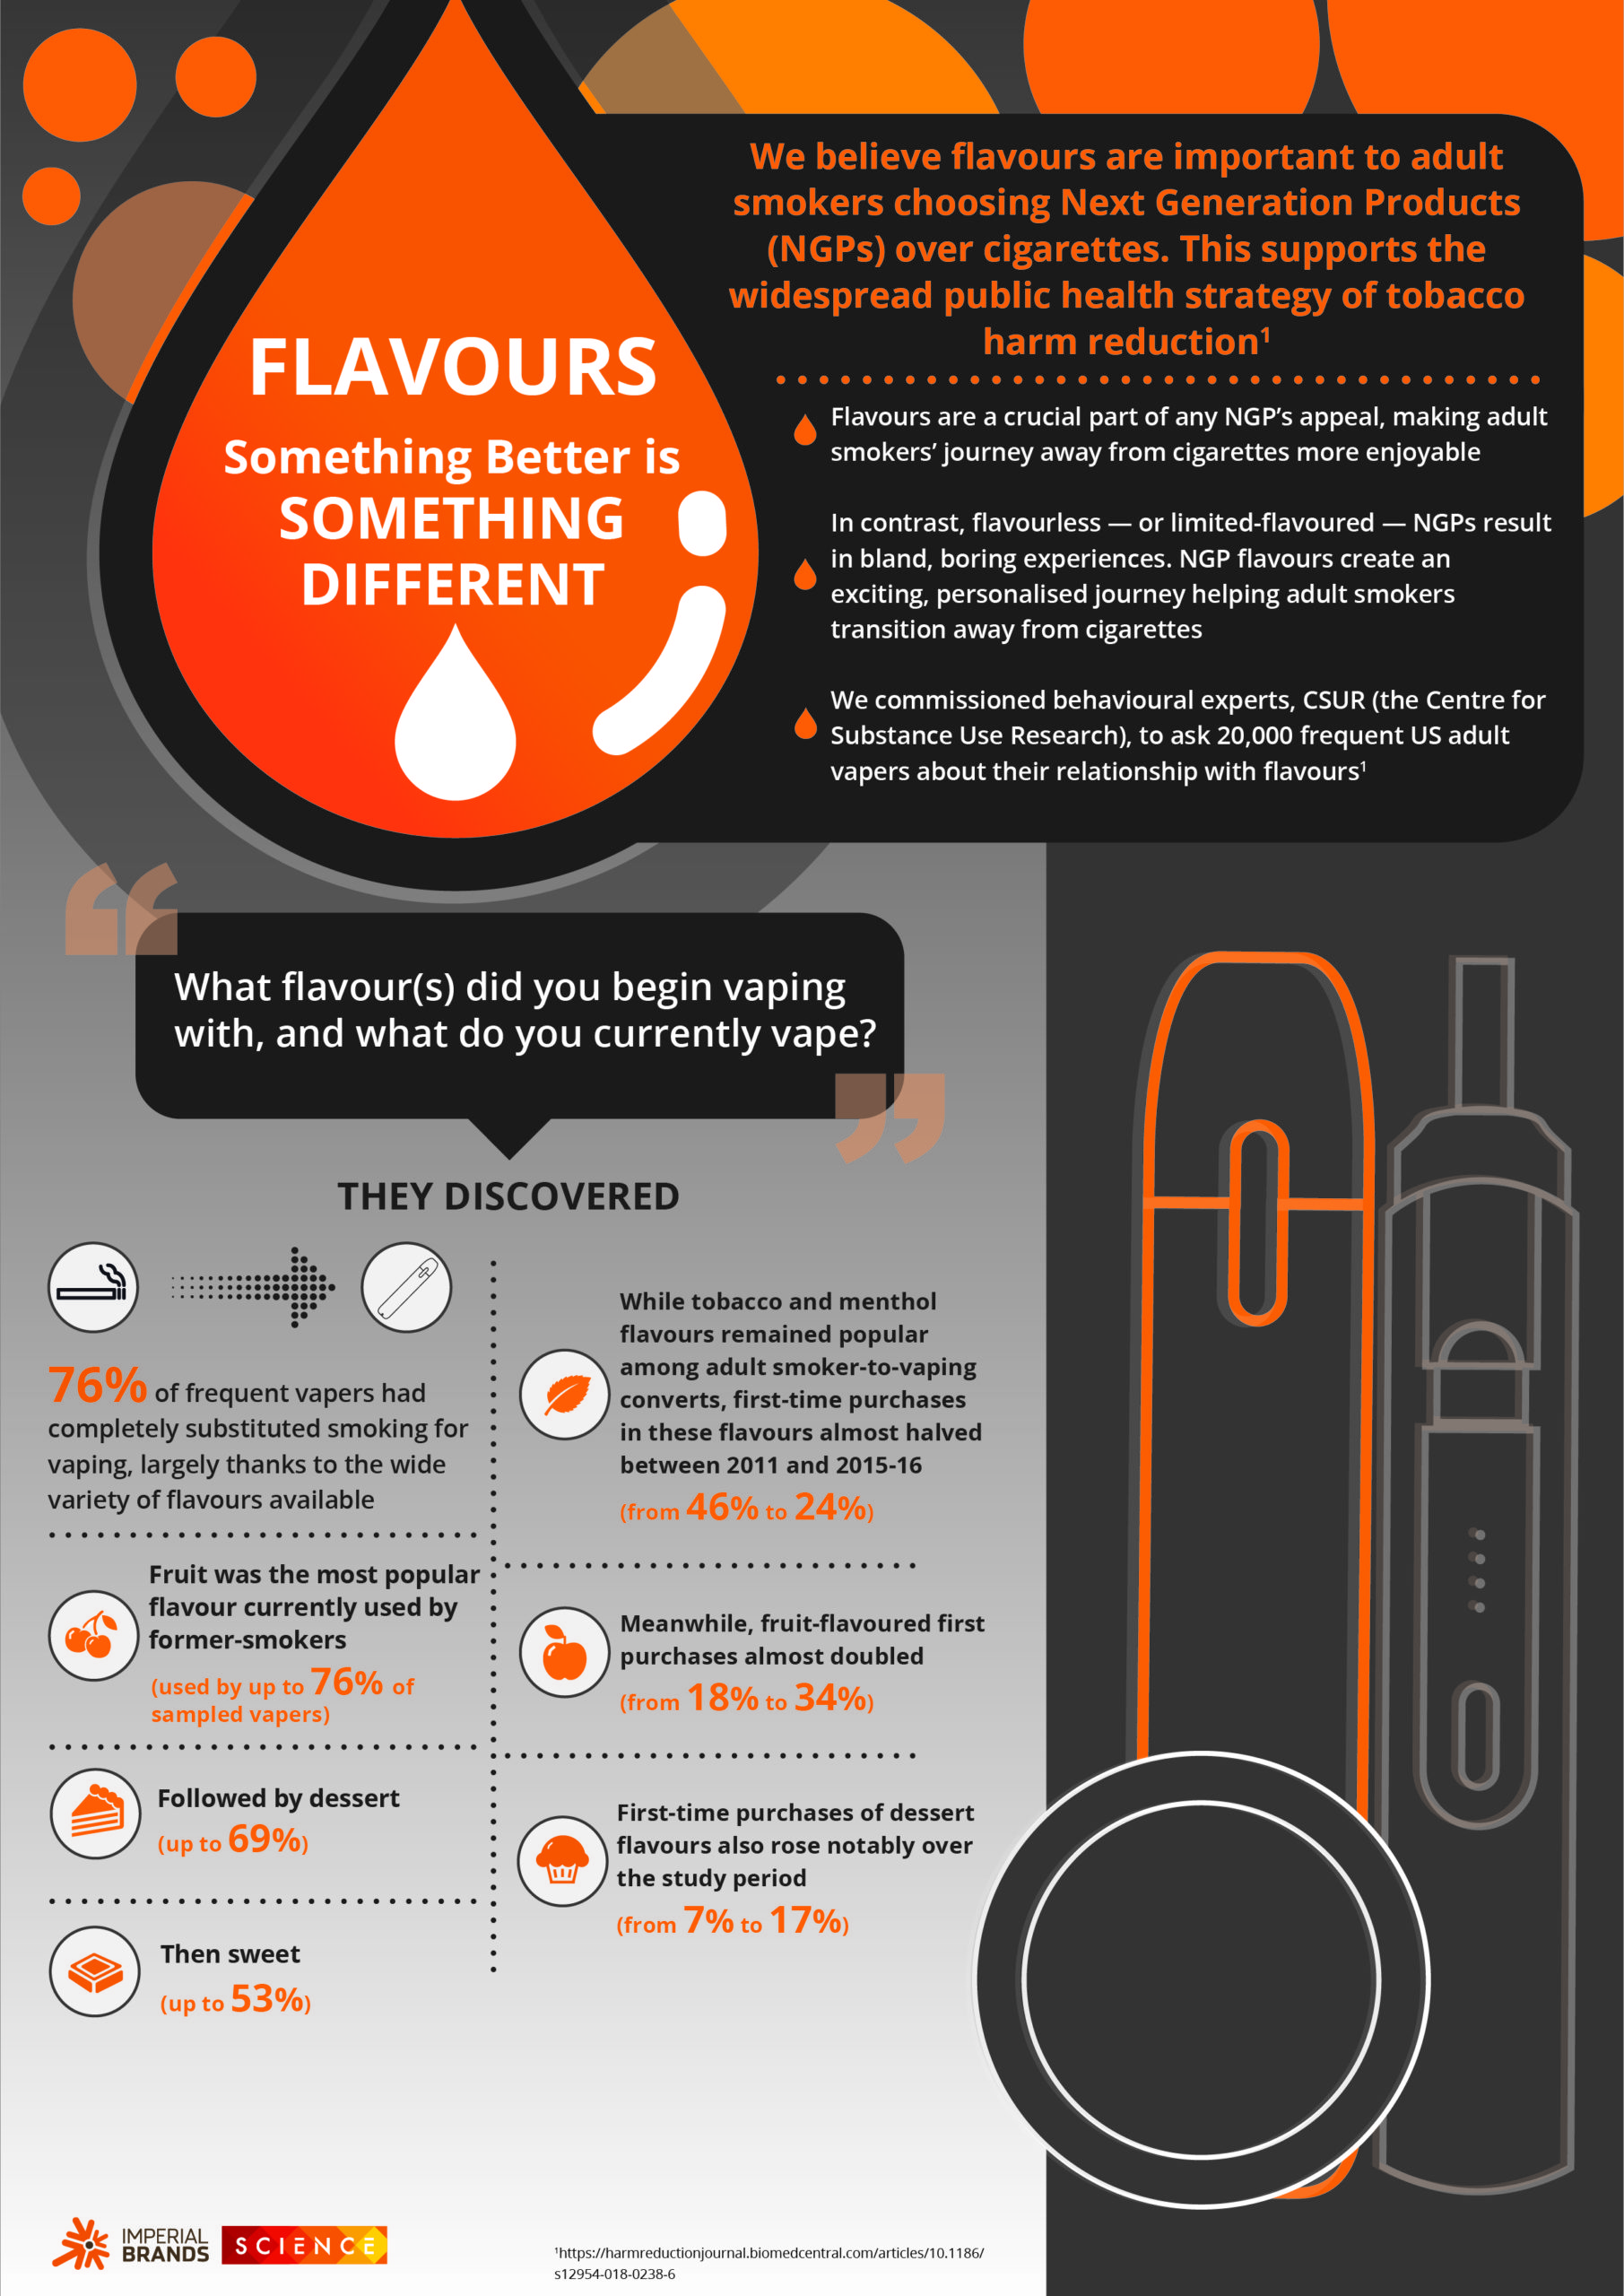 NGP Flavours – Something Better is Something Different